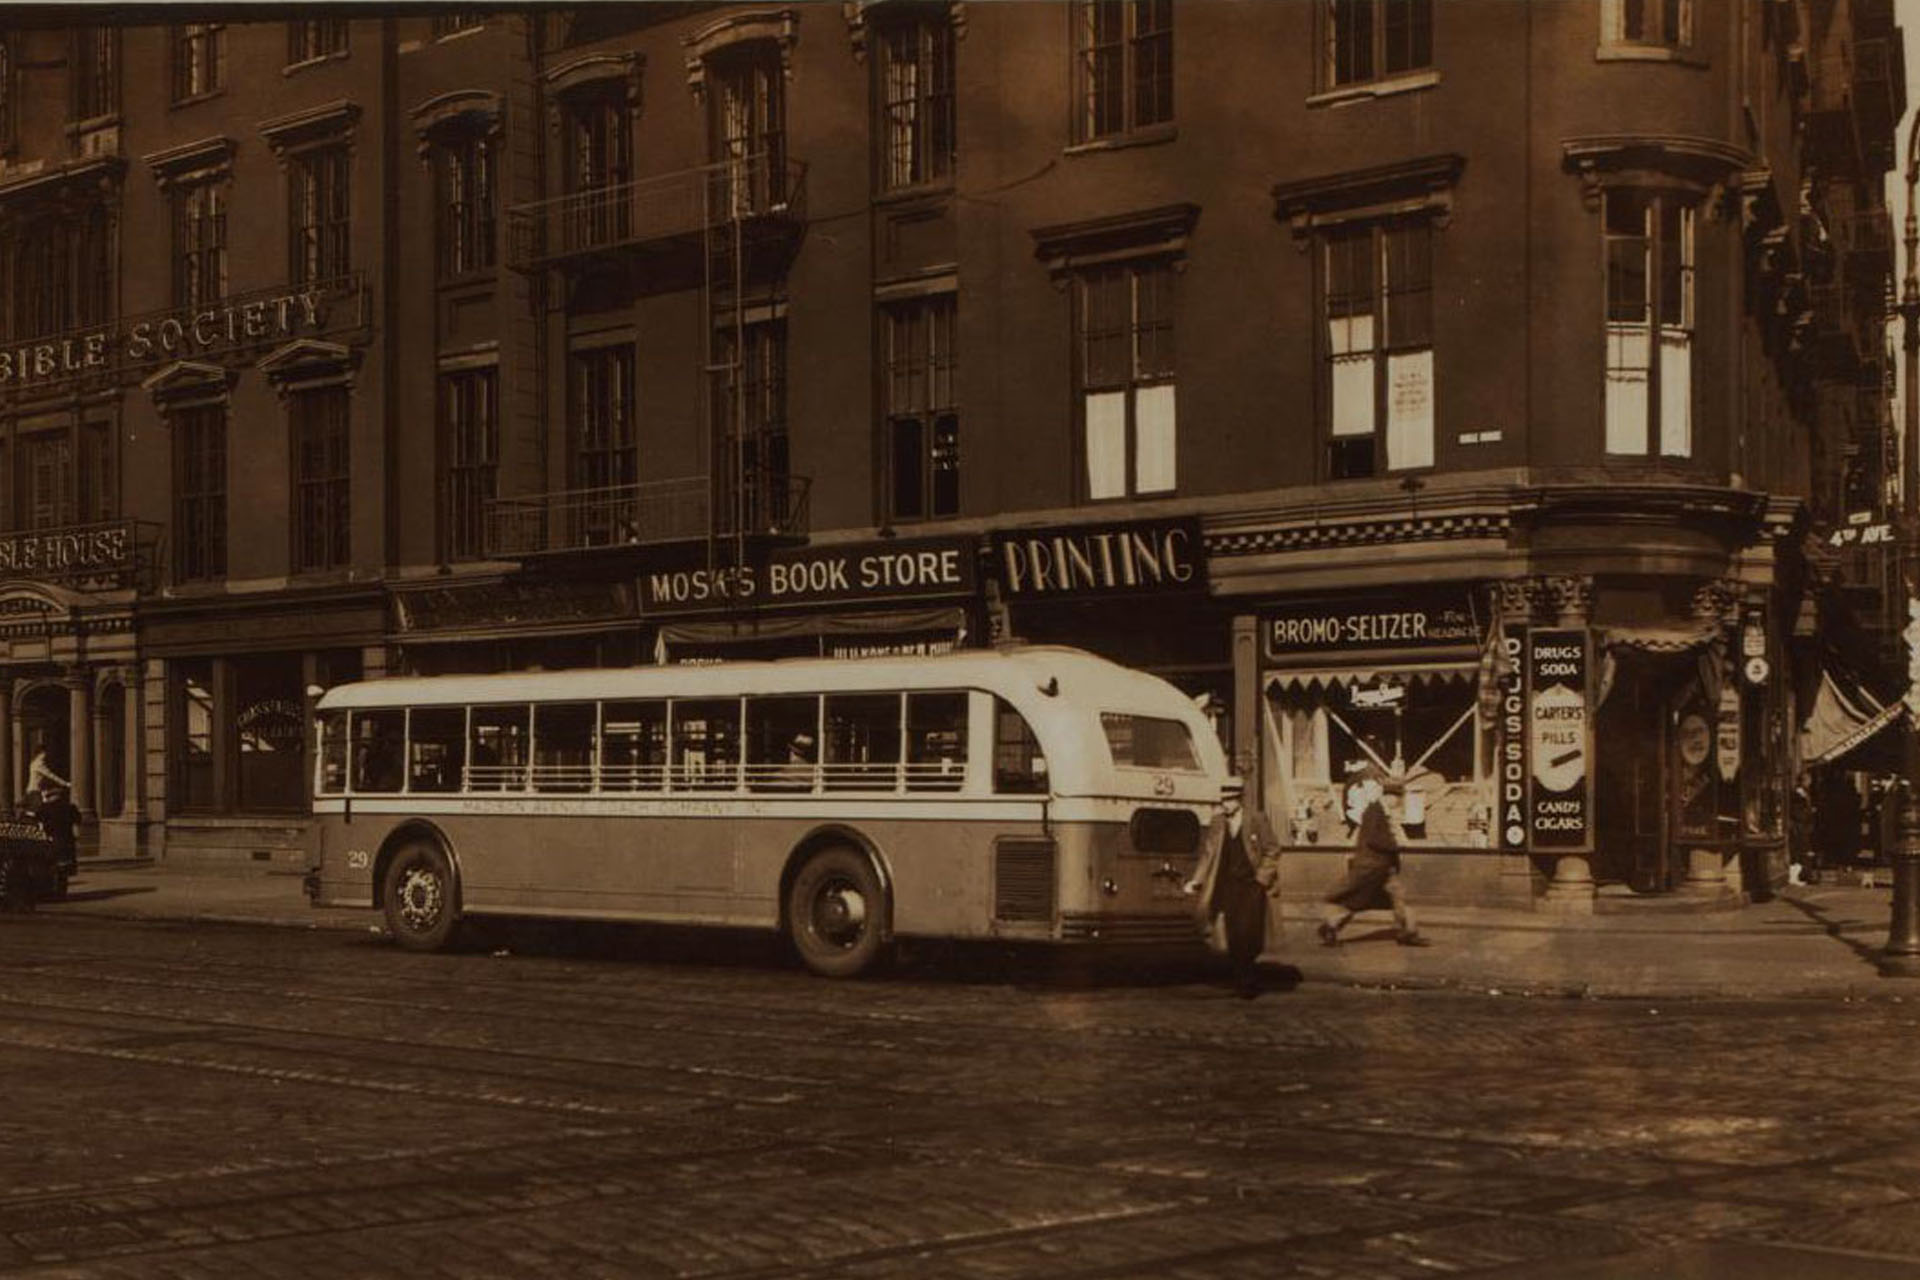 A bus in front of a bookstore in NYC